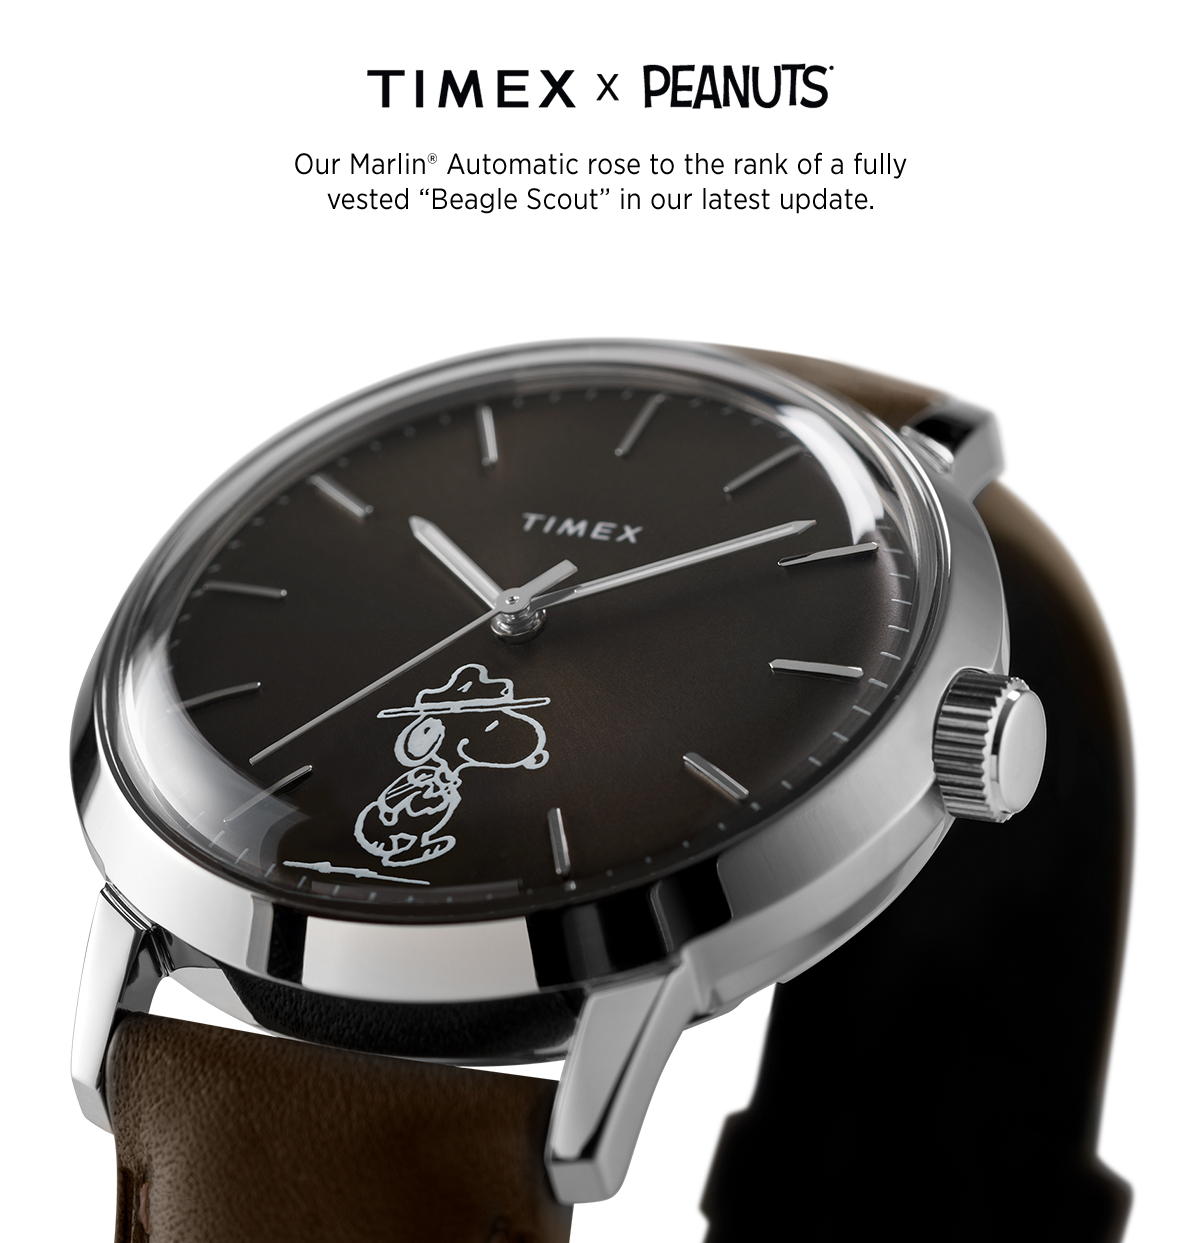 Timex x Peanuts | Our Marlin Automatic rose to the rank of a fully voted Beagle Scout in our latest update